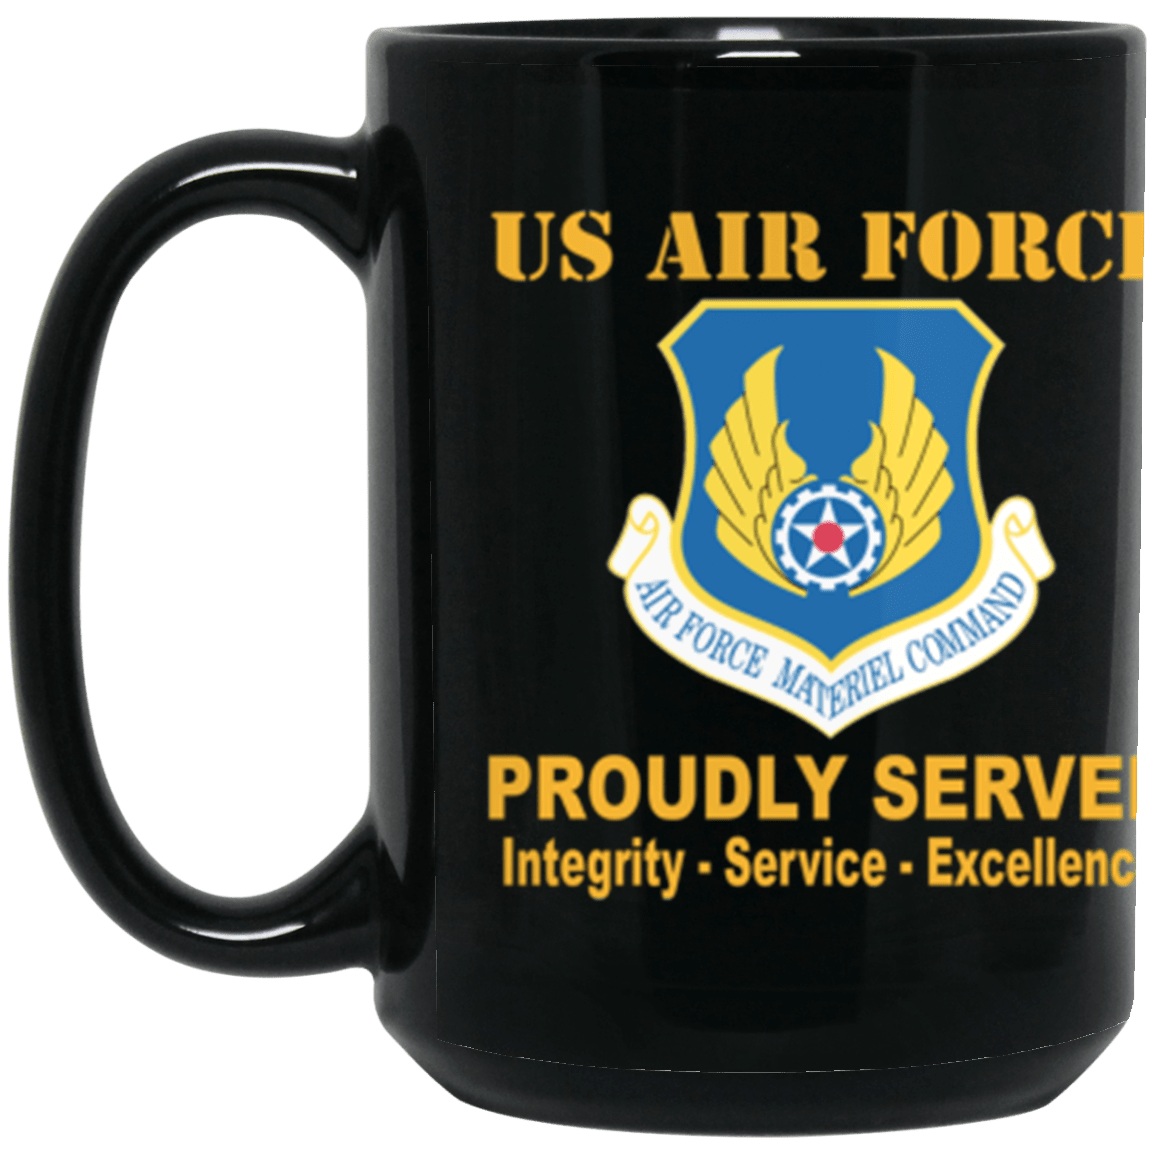 US Air Force Materiel Command Proudly Served Core Values 15 oz. Black Mug-Drinkware-Veterans Nation